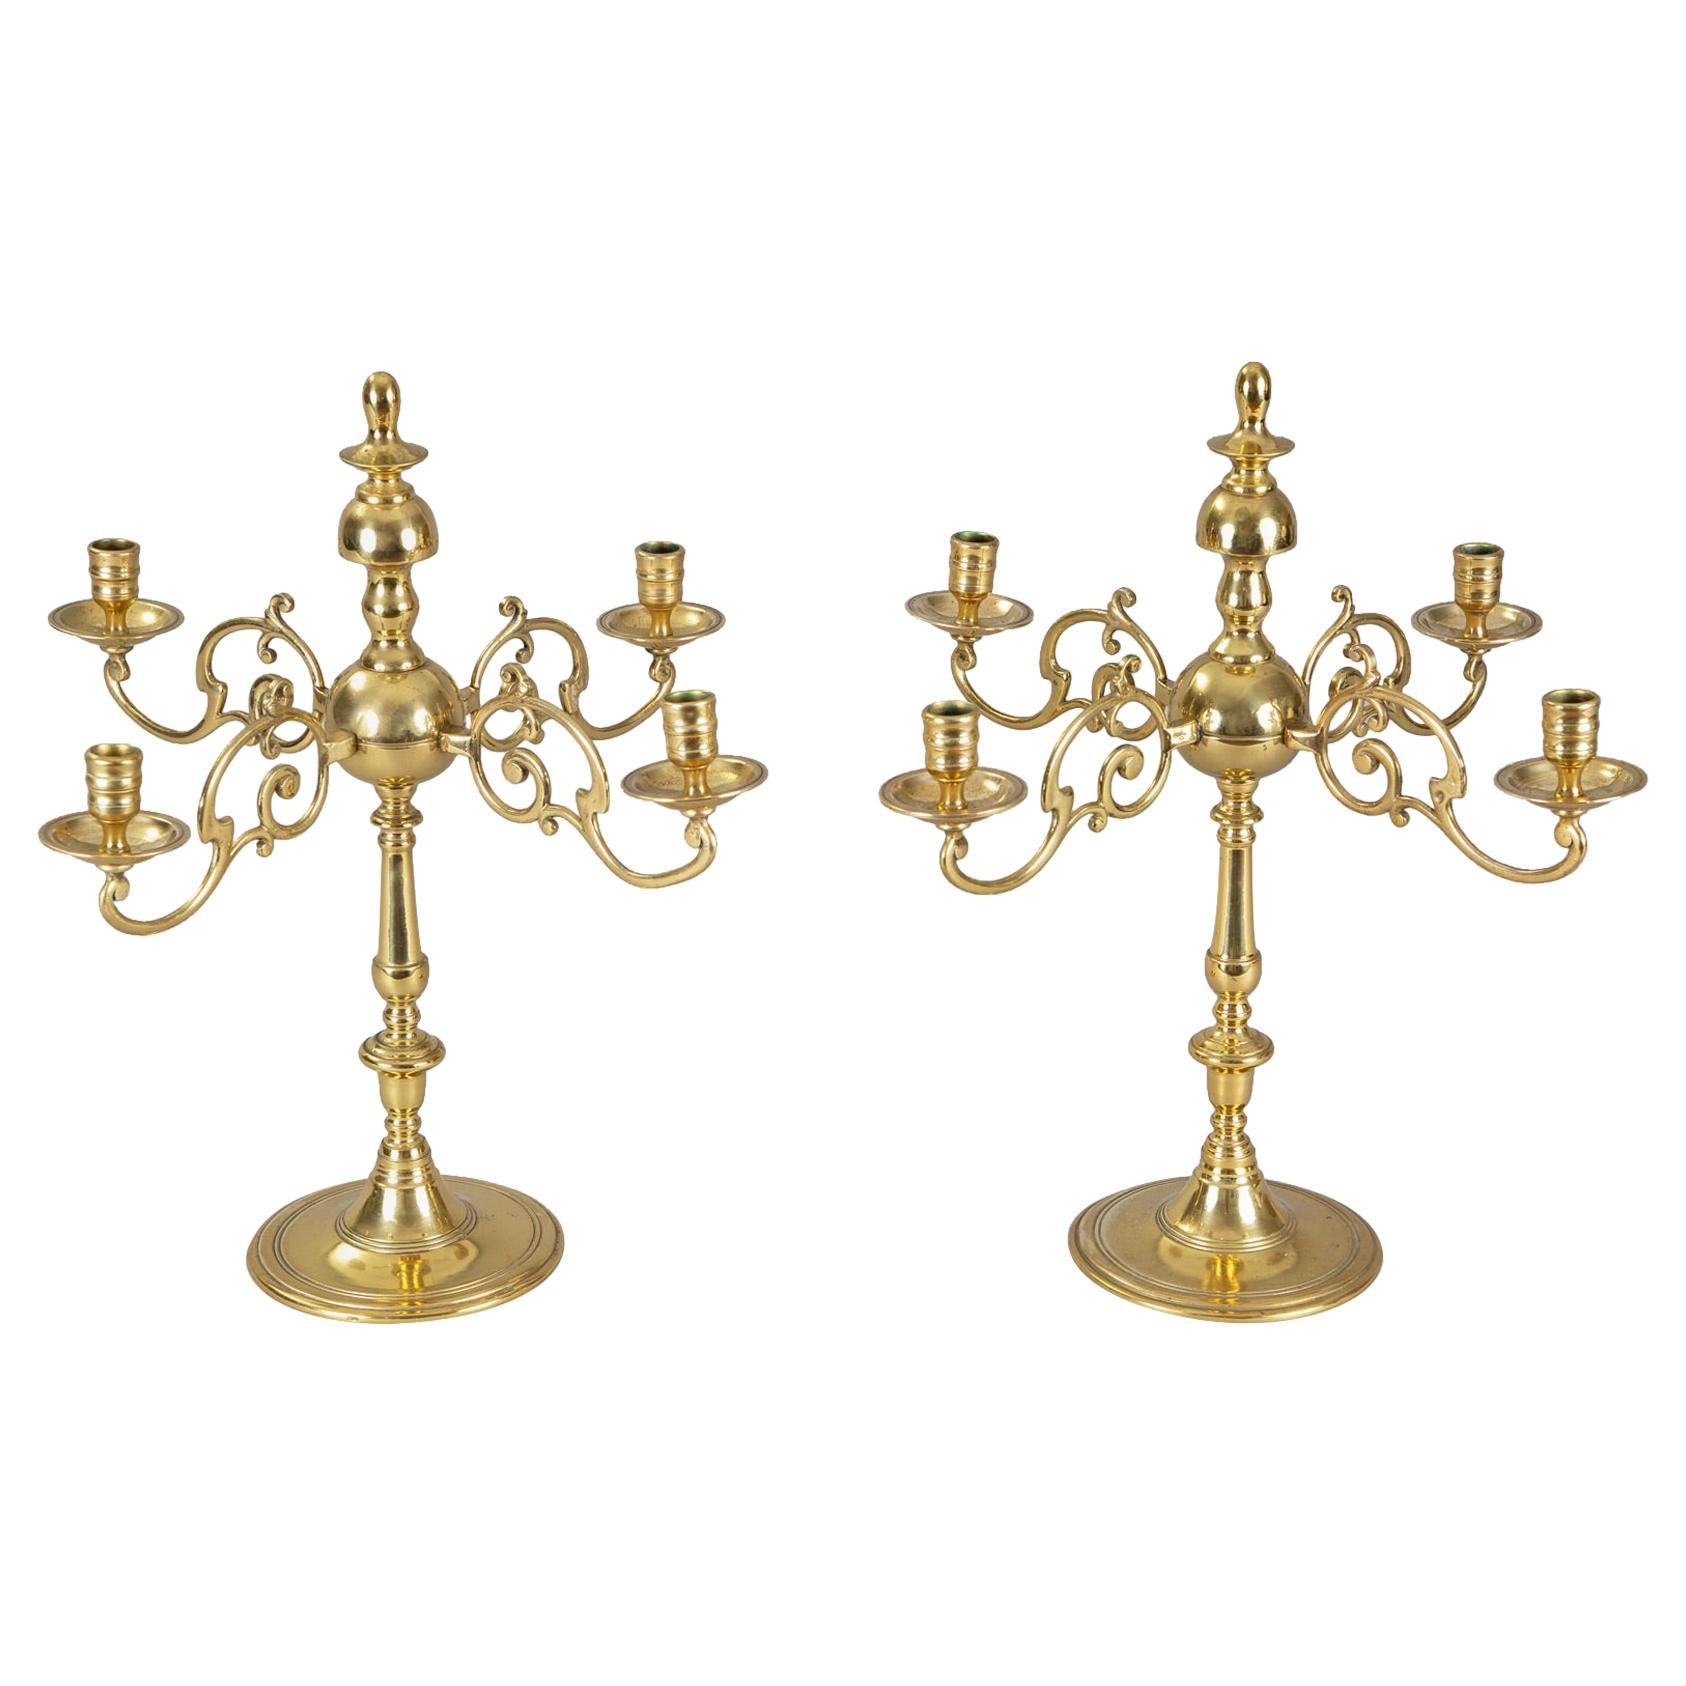 Antique English Brass Candelabras, Pair For Sale